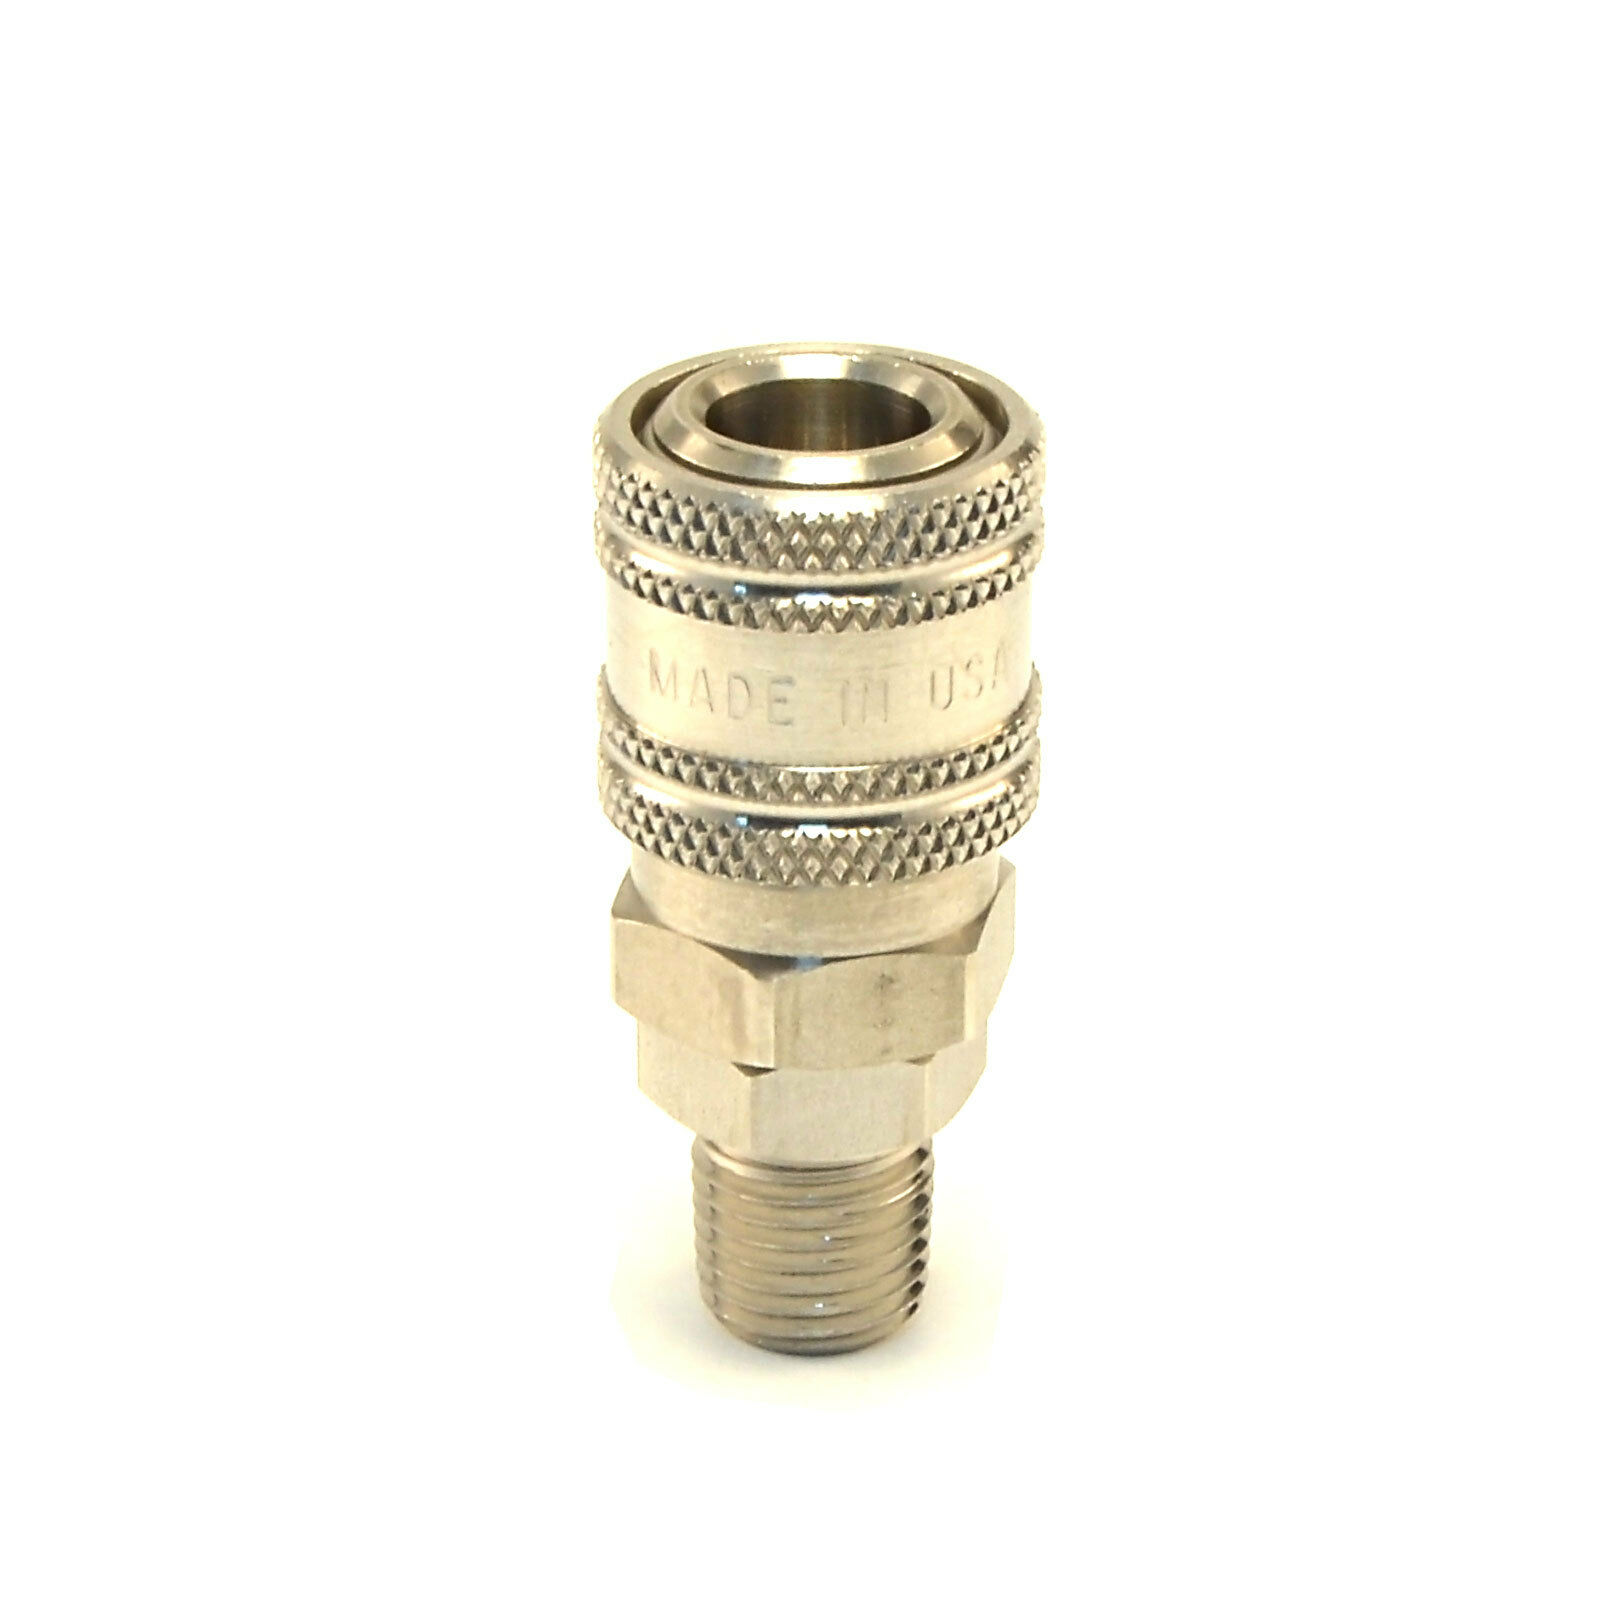 Stainless Steel Quick Connect Coupler 1/4" Male Npt Air Hose Fittings Usa